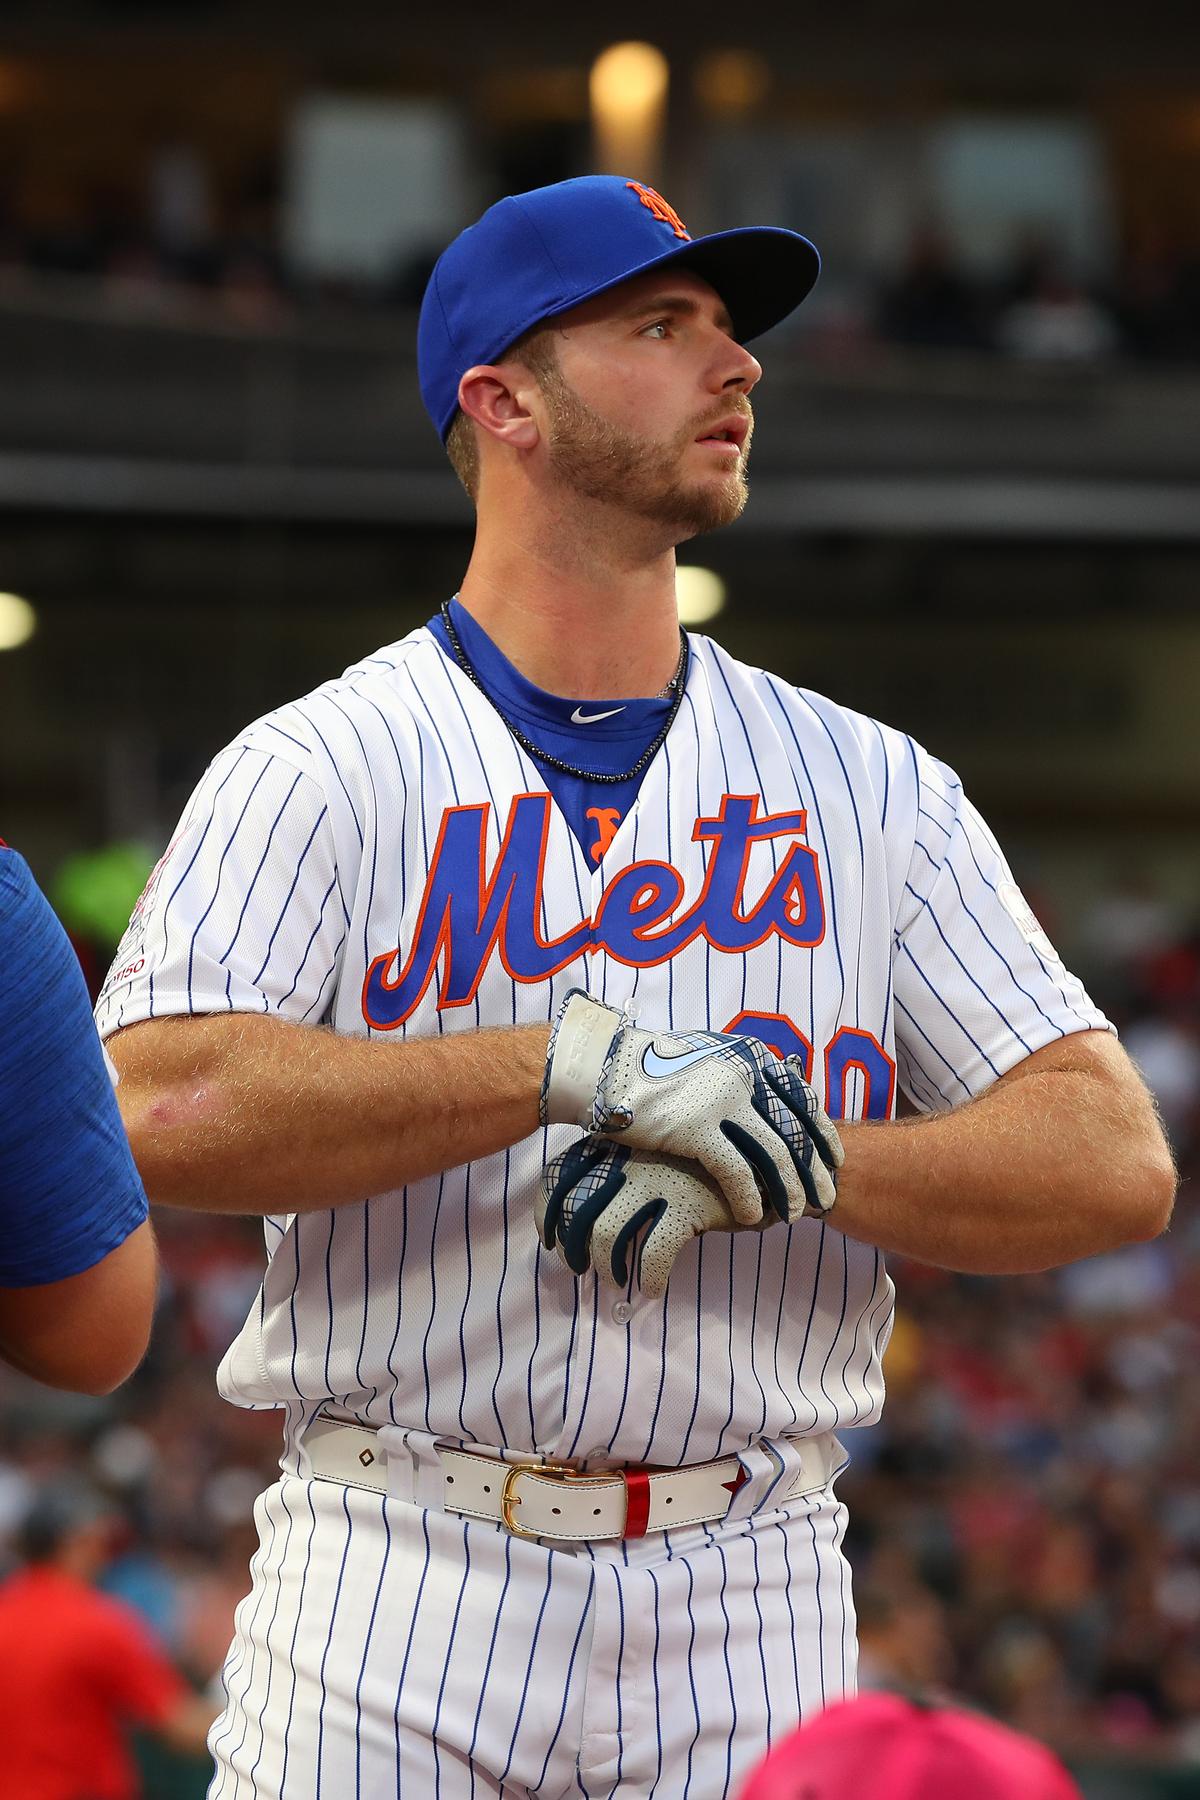 Pete Alonso of the New York Mets competes in the T-Mobile Home Run Derby at Progressive Field on July 8, 2019, in Cleveland, Ohio. (Gregory Shamus/Getty Images)